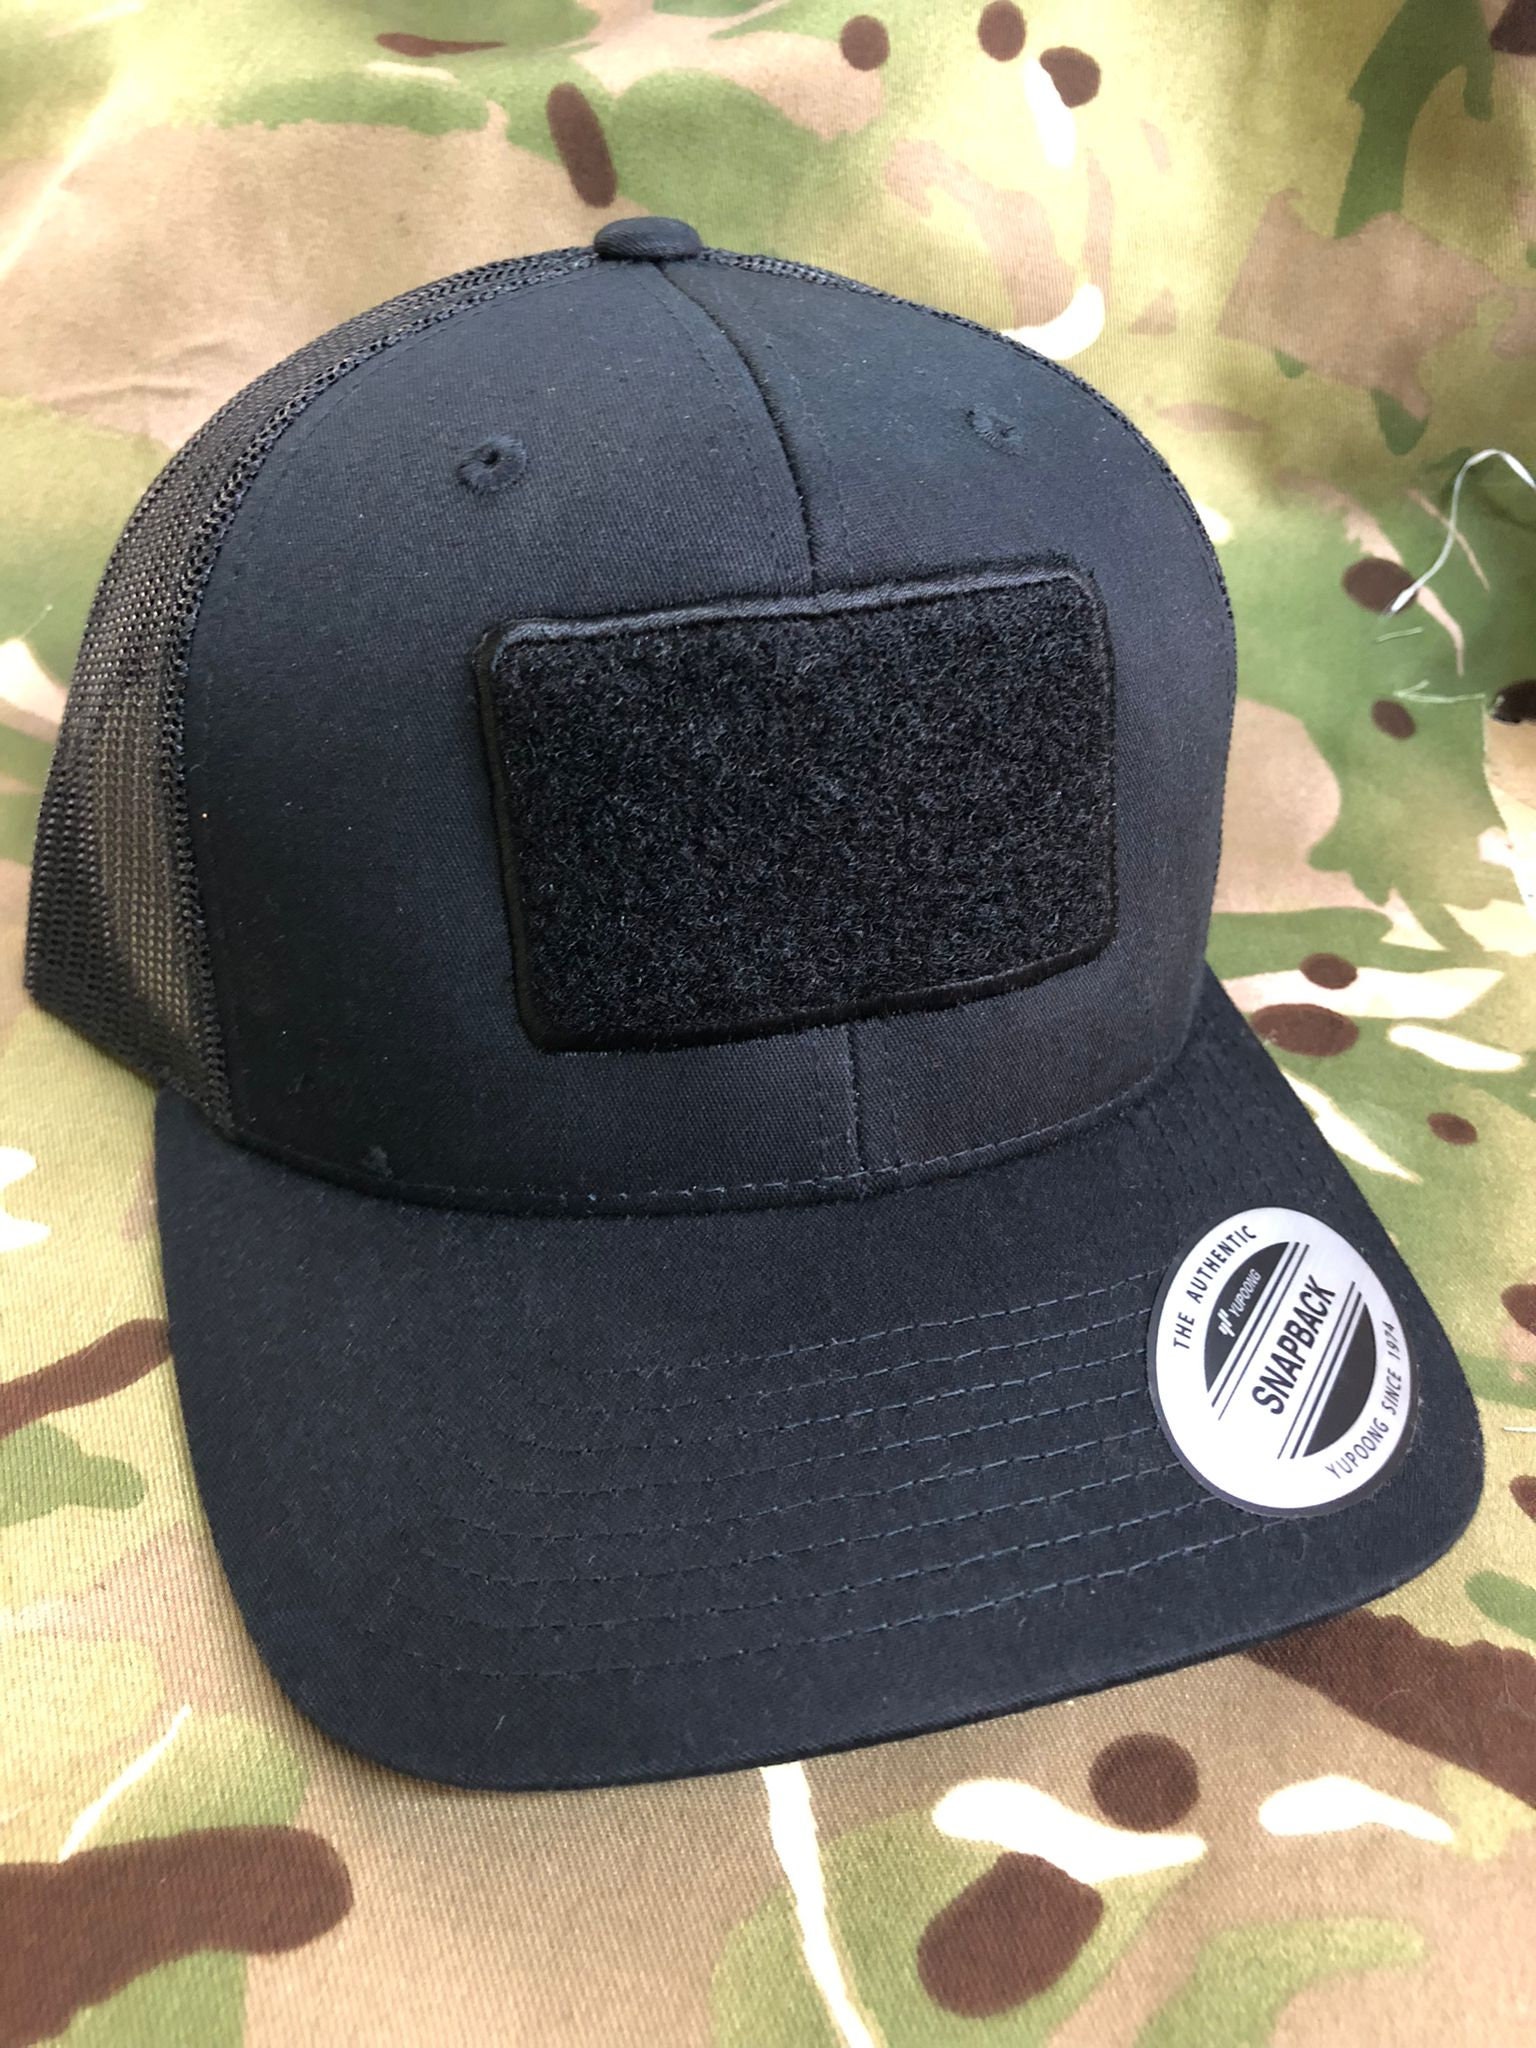 Velcro Patch Shooters - Cap Yupoong Tacticool CAP Hat Stretch Tactical Etsy Flexfit Trucker Back Logo Embroidered